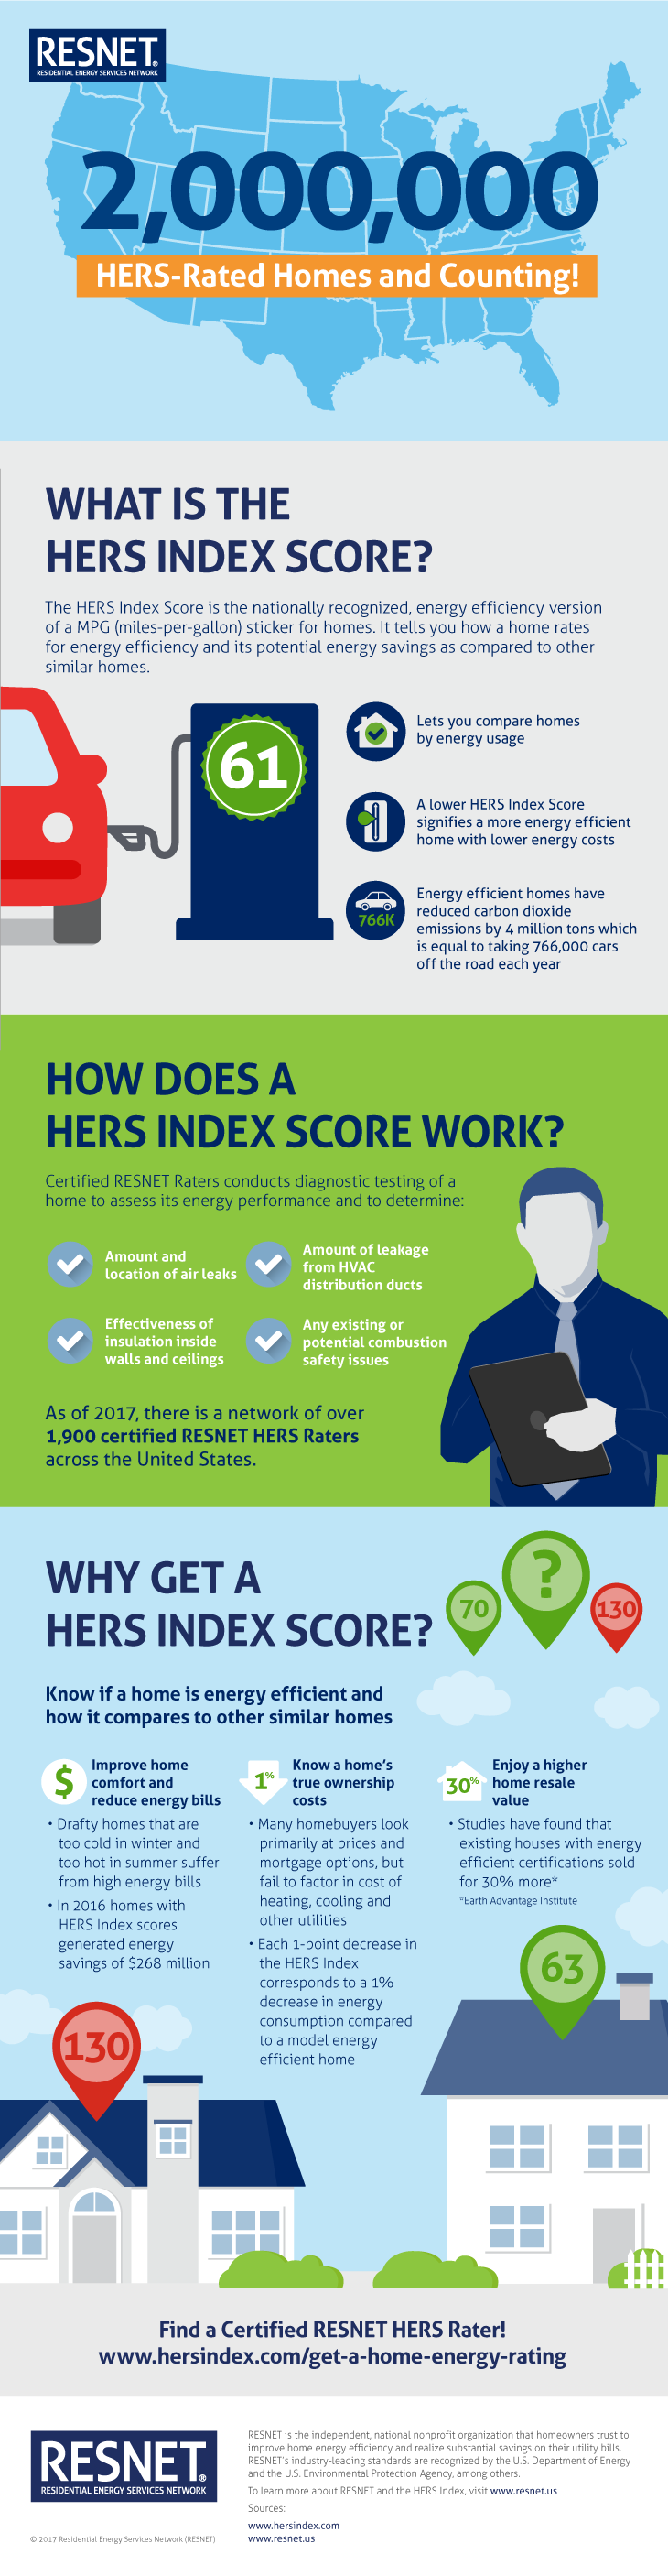 RESNET 2 Million HERS® Rated Home Infographic